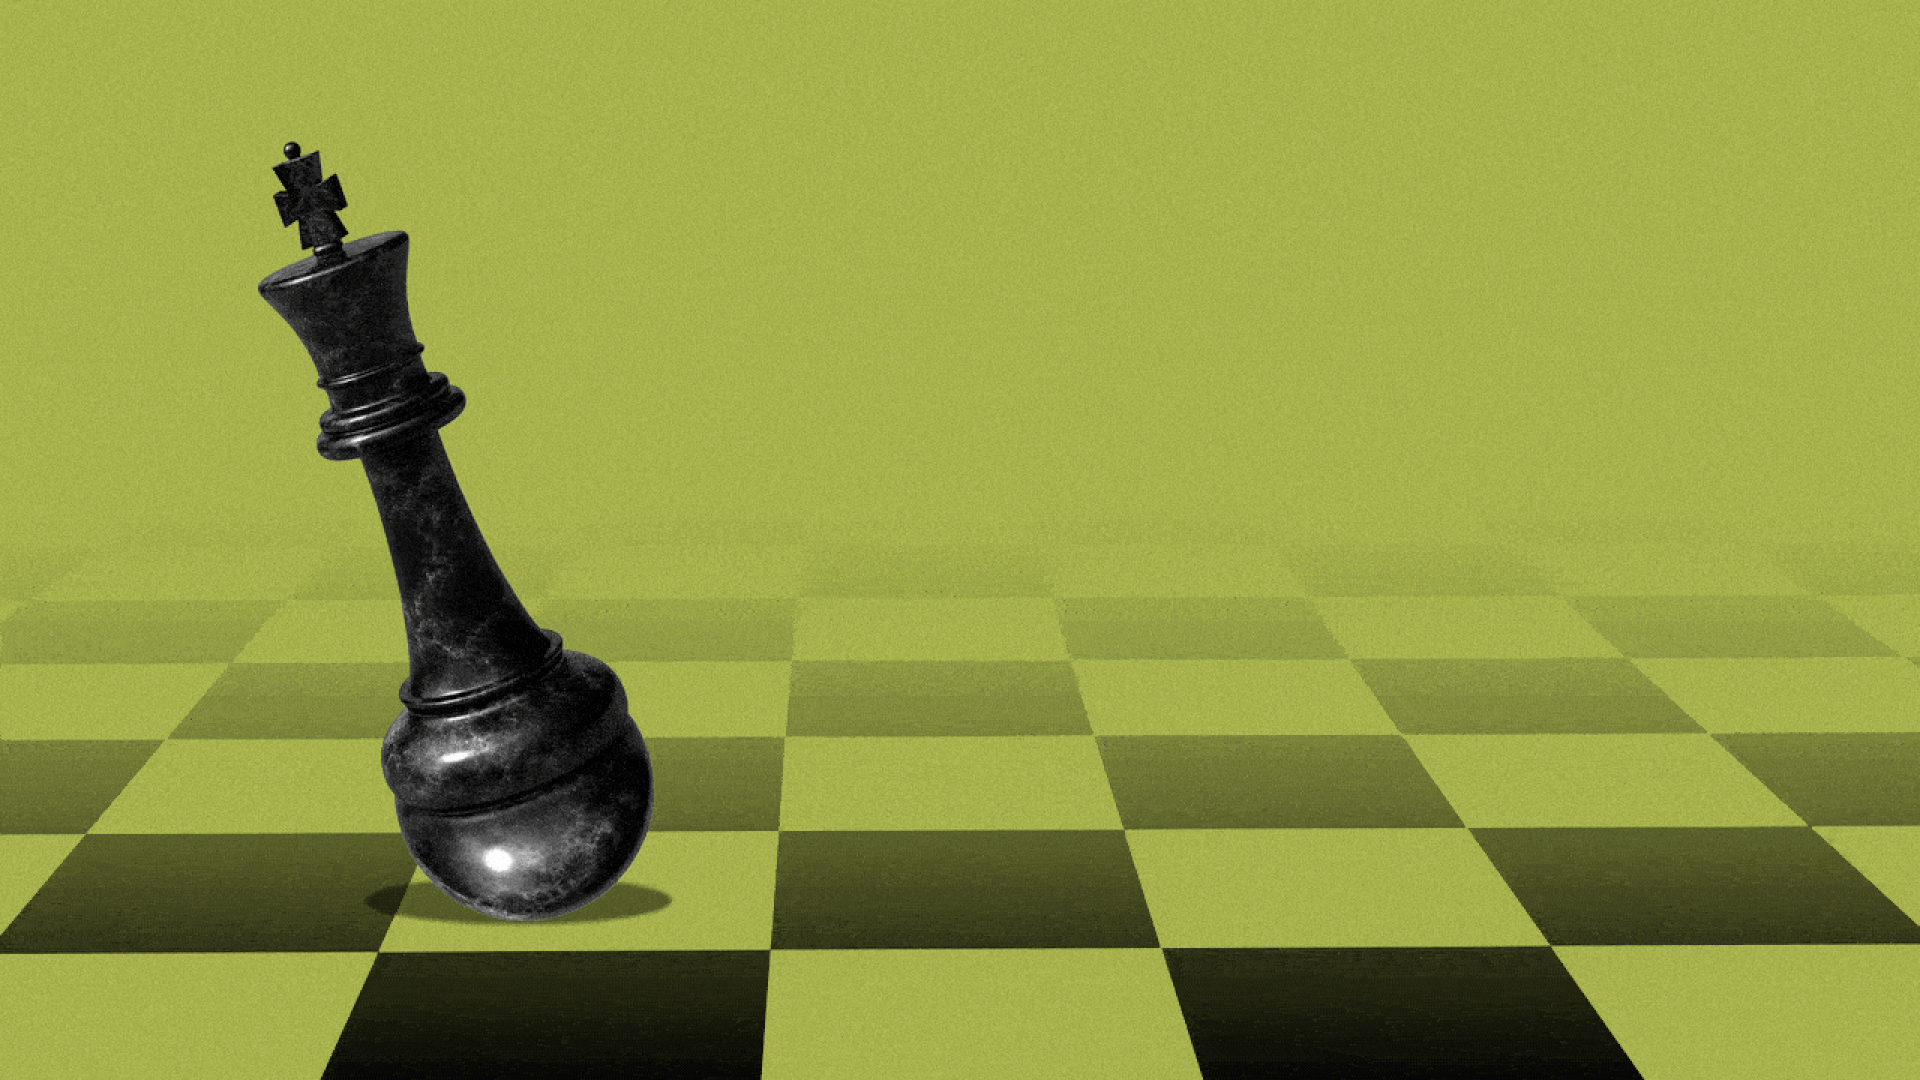 Illustration of a wobbling king chess piece that won't fall down